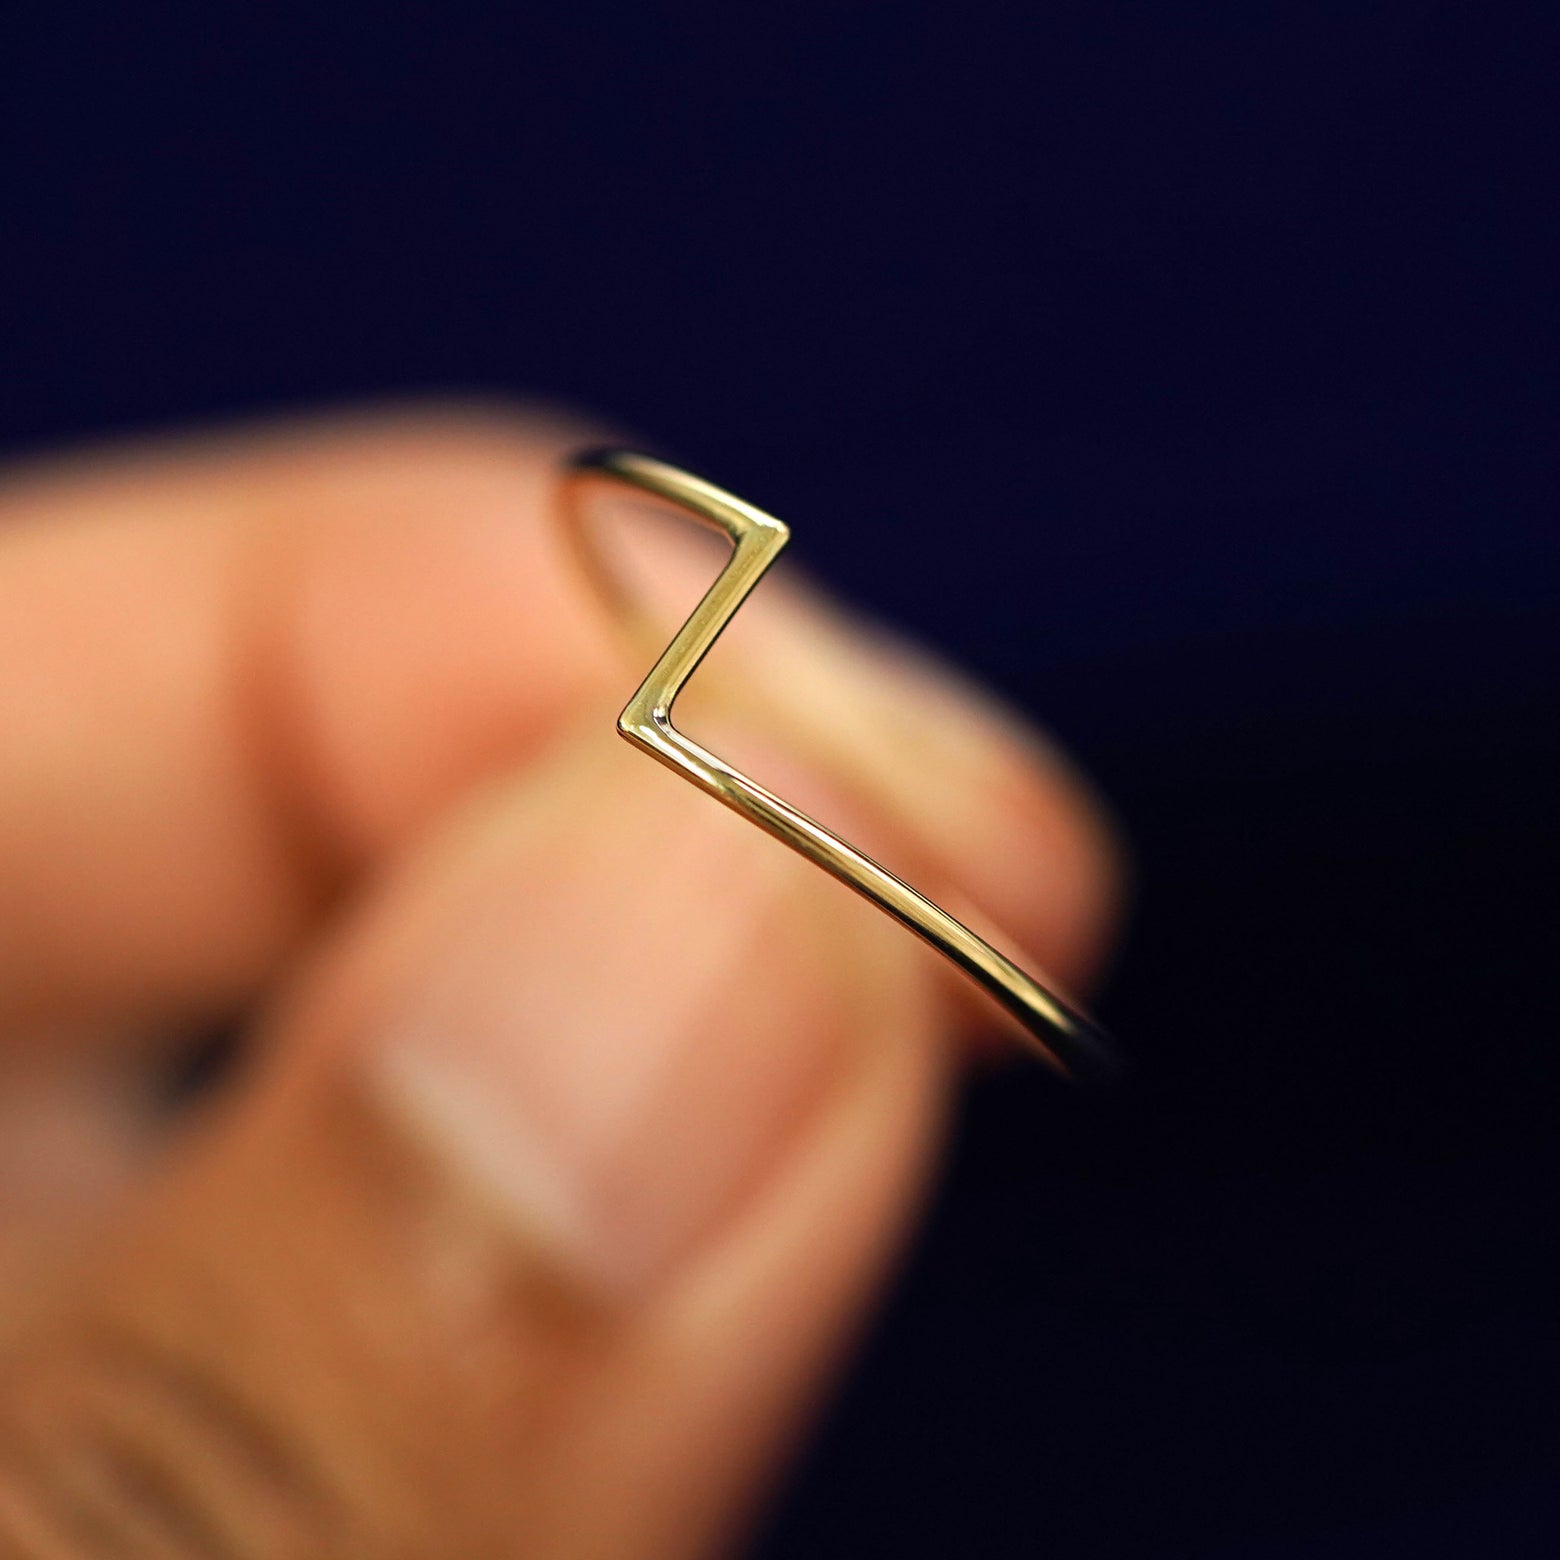 A model holding a Zig Zag Ring tilted to show the side of the ring